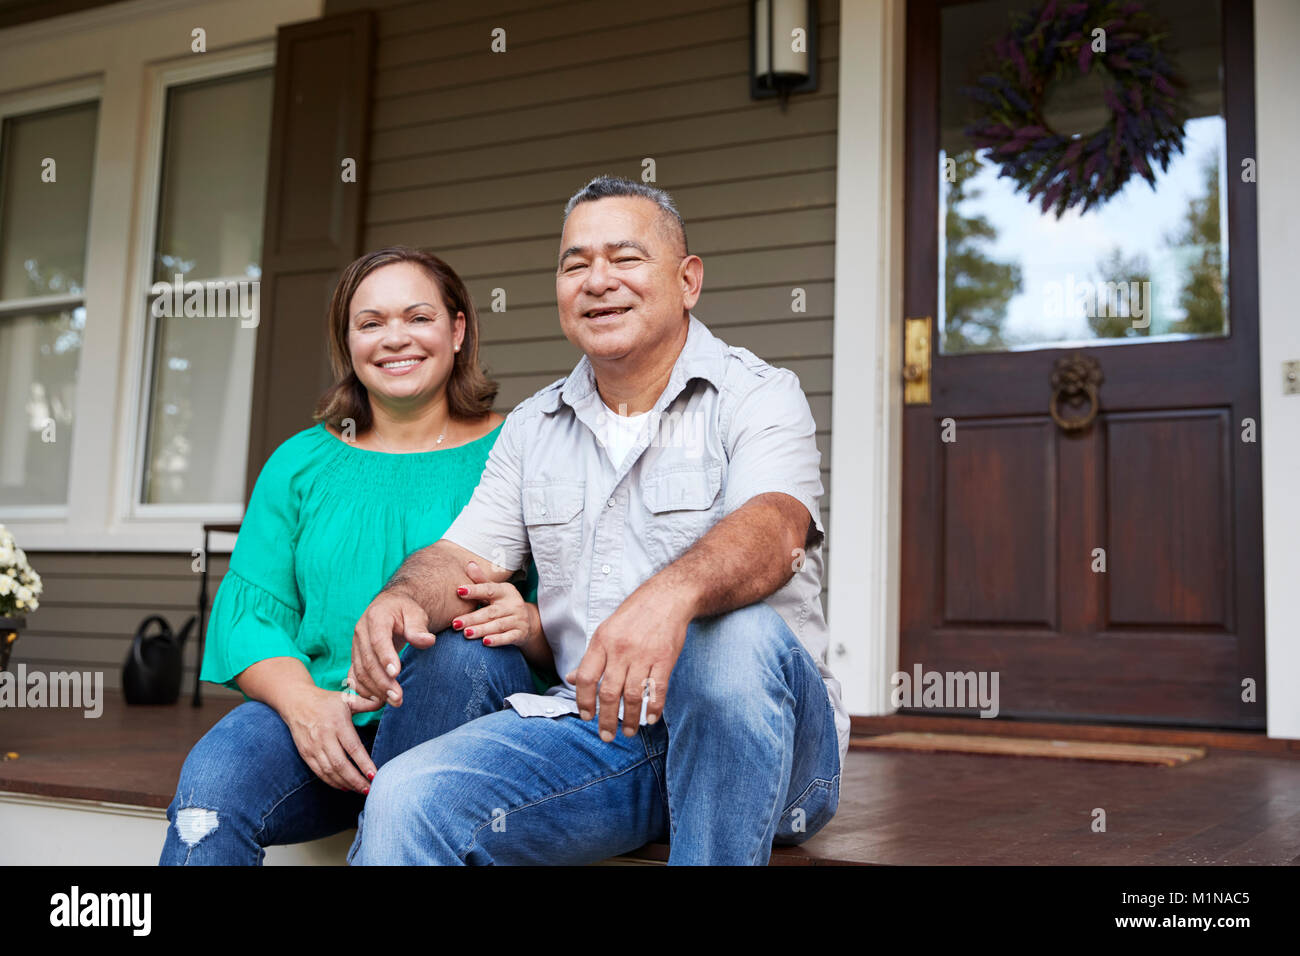 Portrait Of Smiling Senior Couple Sitting in front of their Home Banque D'Images